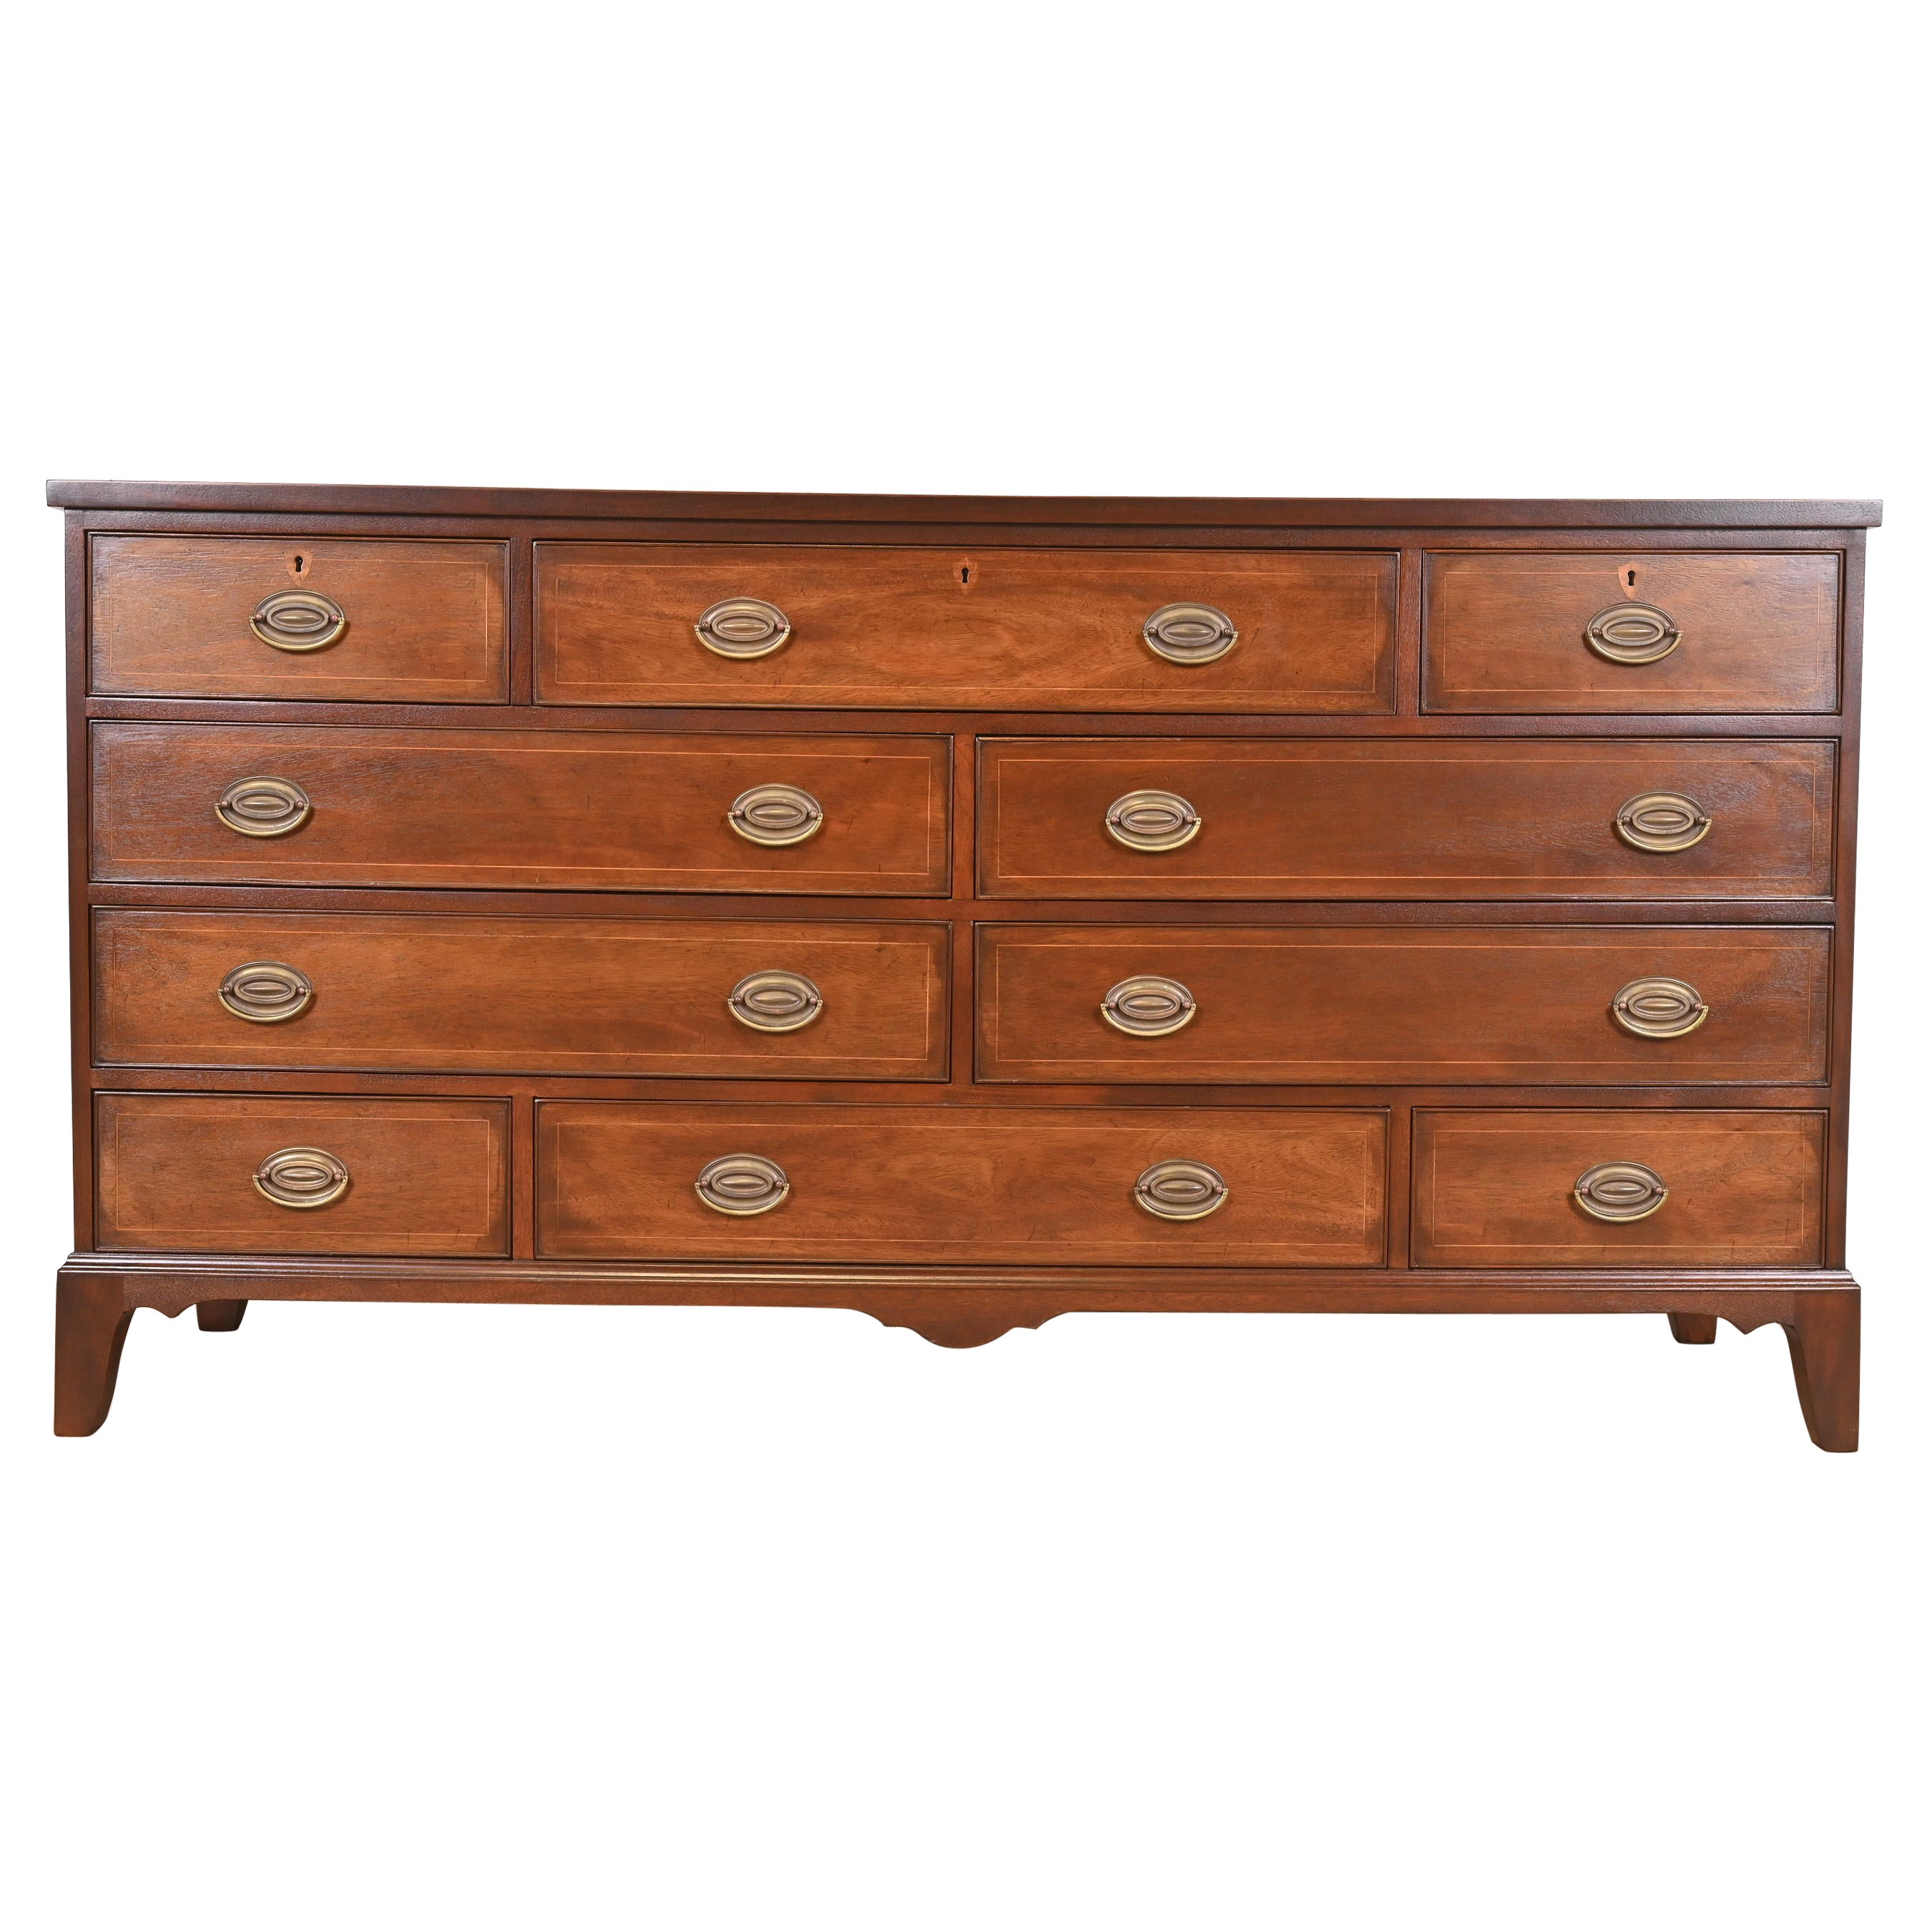 Kittinger Federal Inlaid Mahogany Ten-Drawer Dresser, Newly Refinished (en anglais)